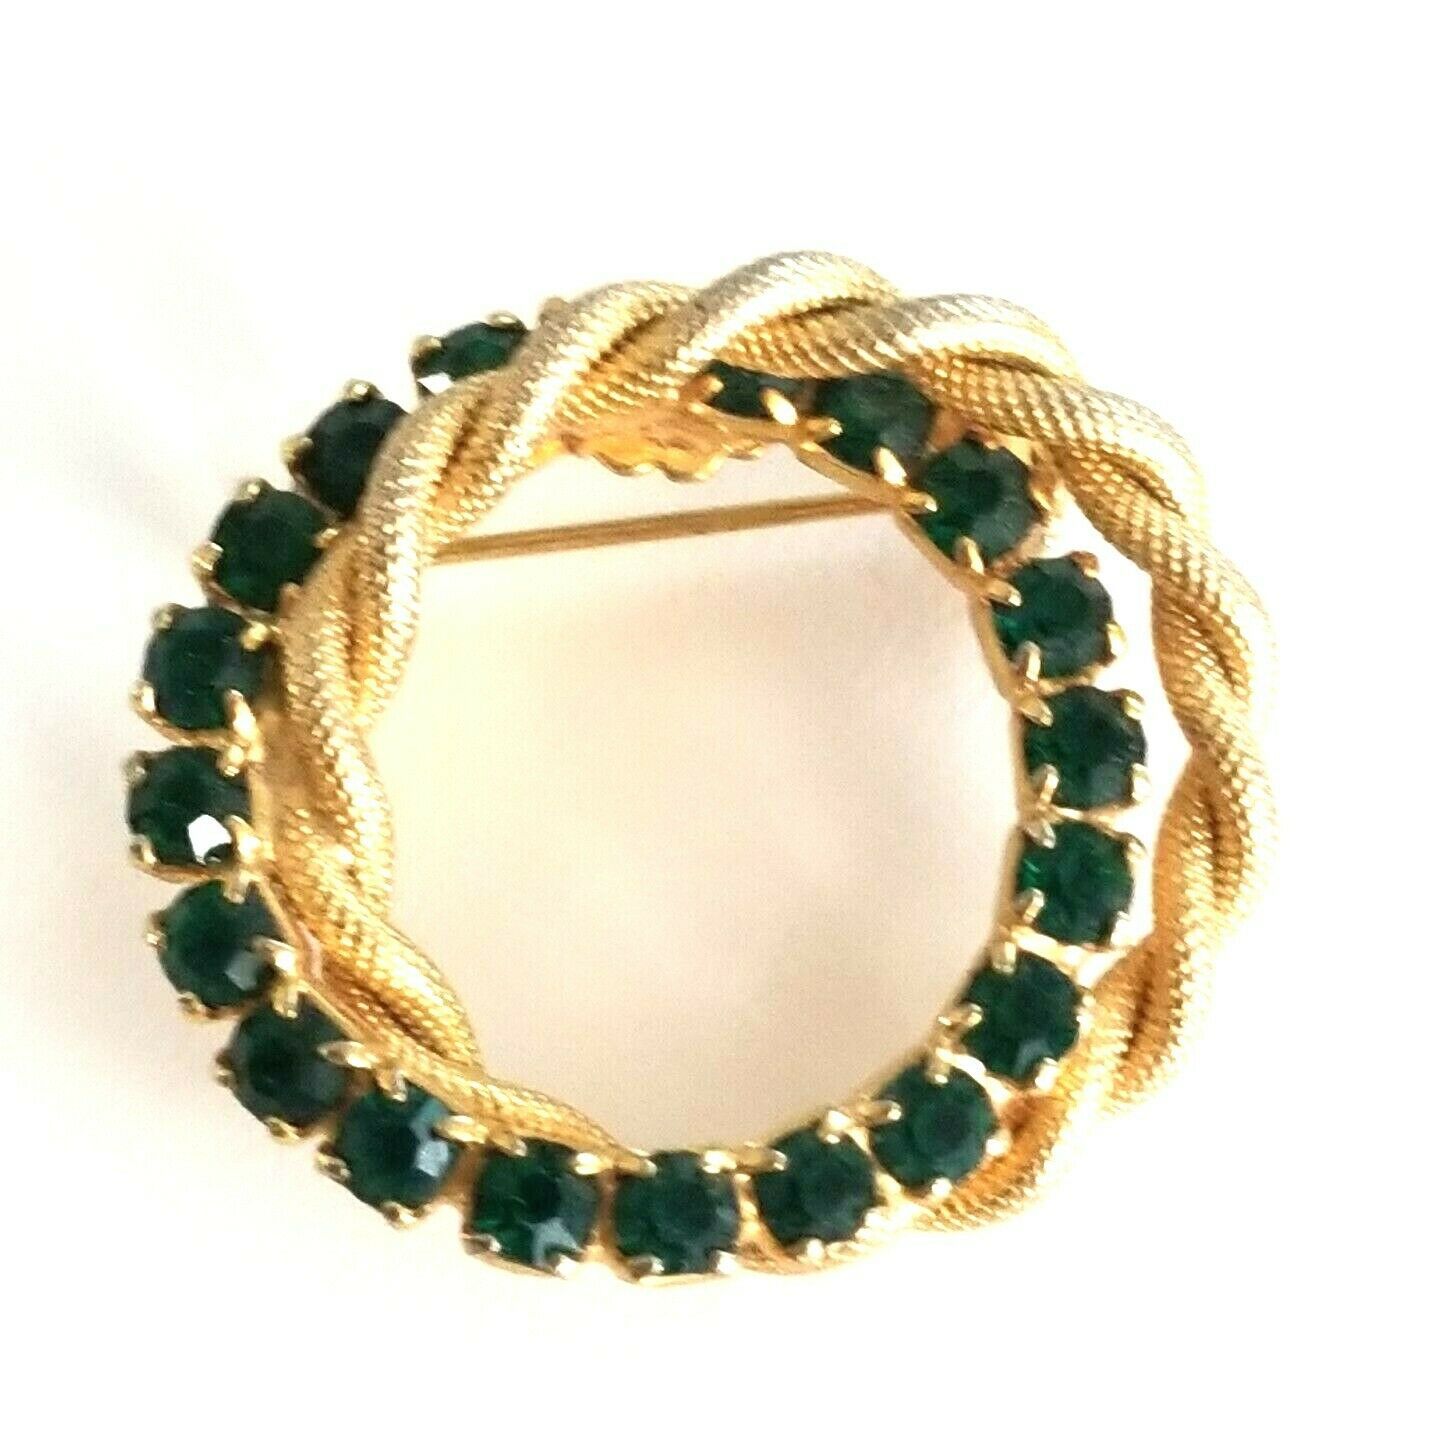 Primary image for VTG Double Circle Brooch Green Rhinestone & Gold Tone Twisted Rope Interlocking